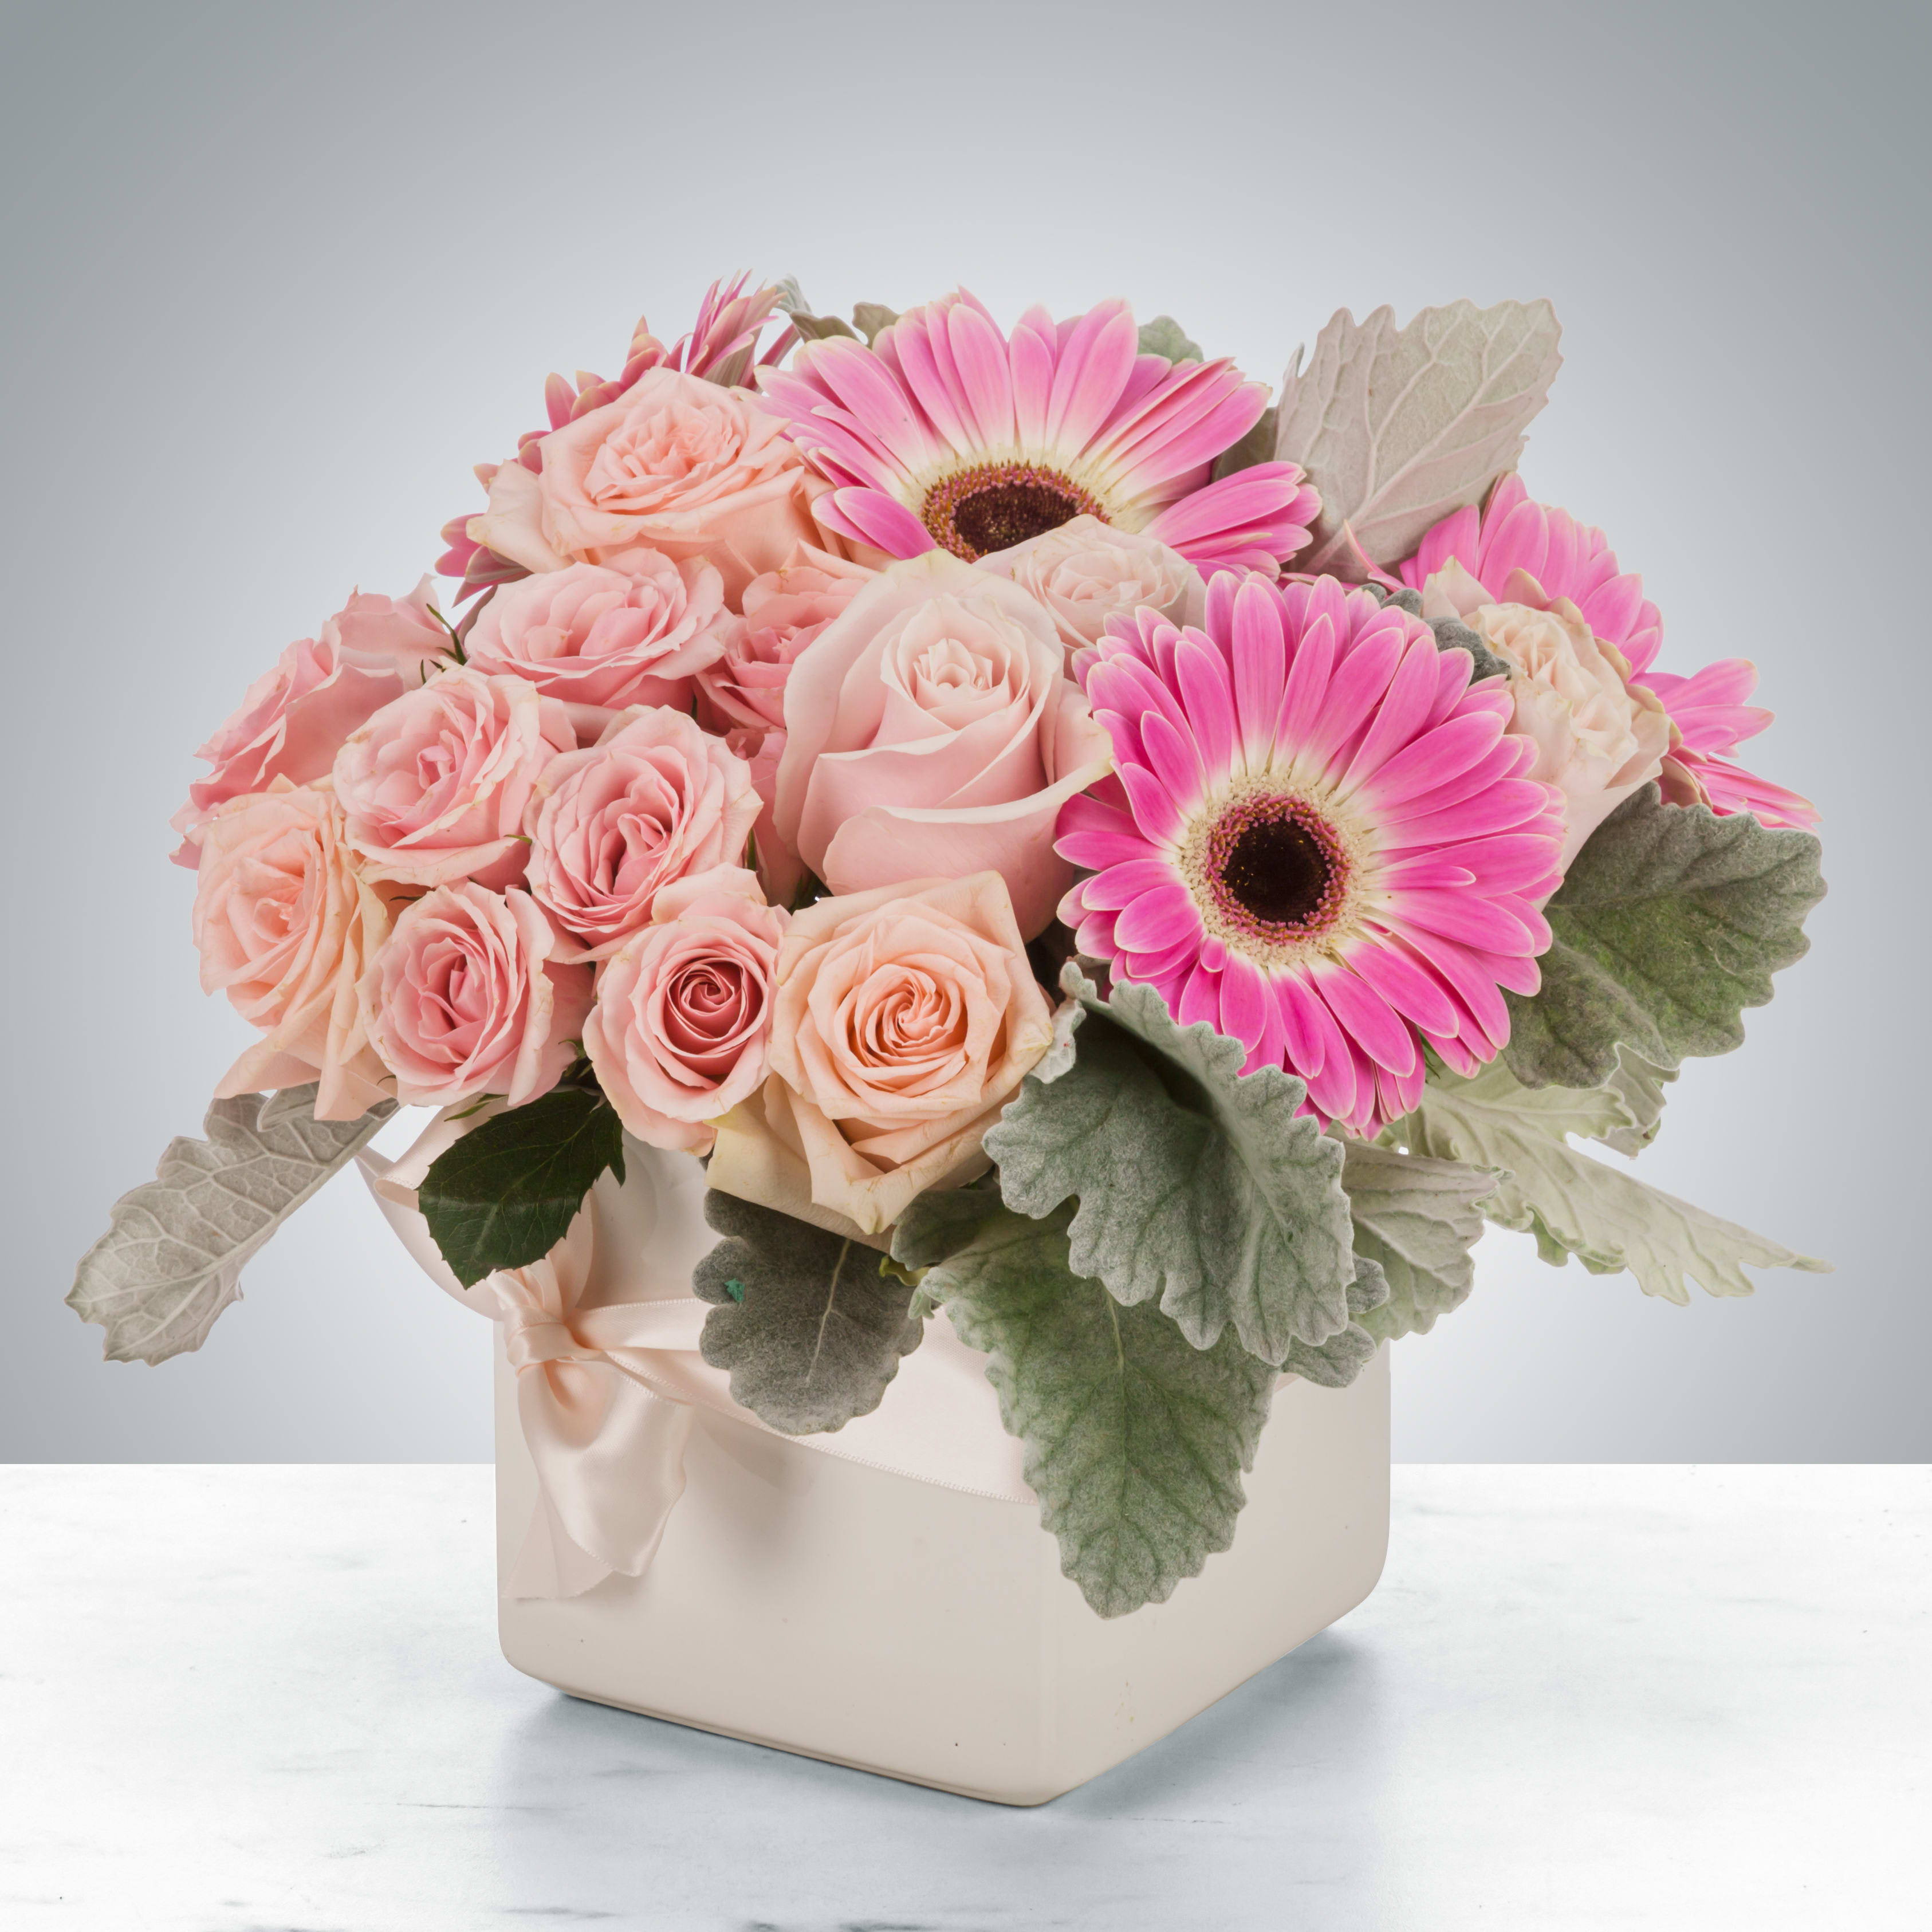 Little Dreamer  - The perfect arrangement for welcoming a baby girl into the world or celebrating a birthday. Send this soft and sweet arrangement to somebody as lovely as the flowers!  Approximate Dimensions: 12&quot;D x 10&quot;H